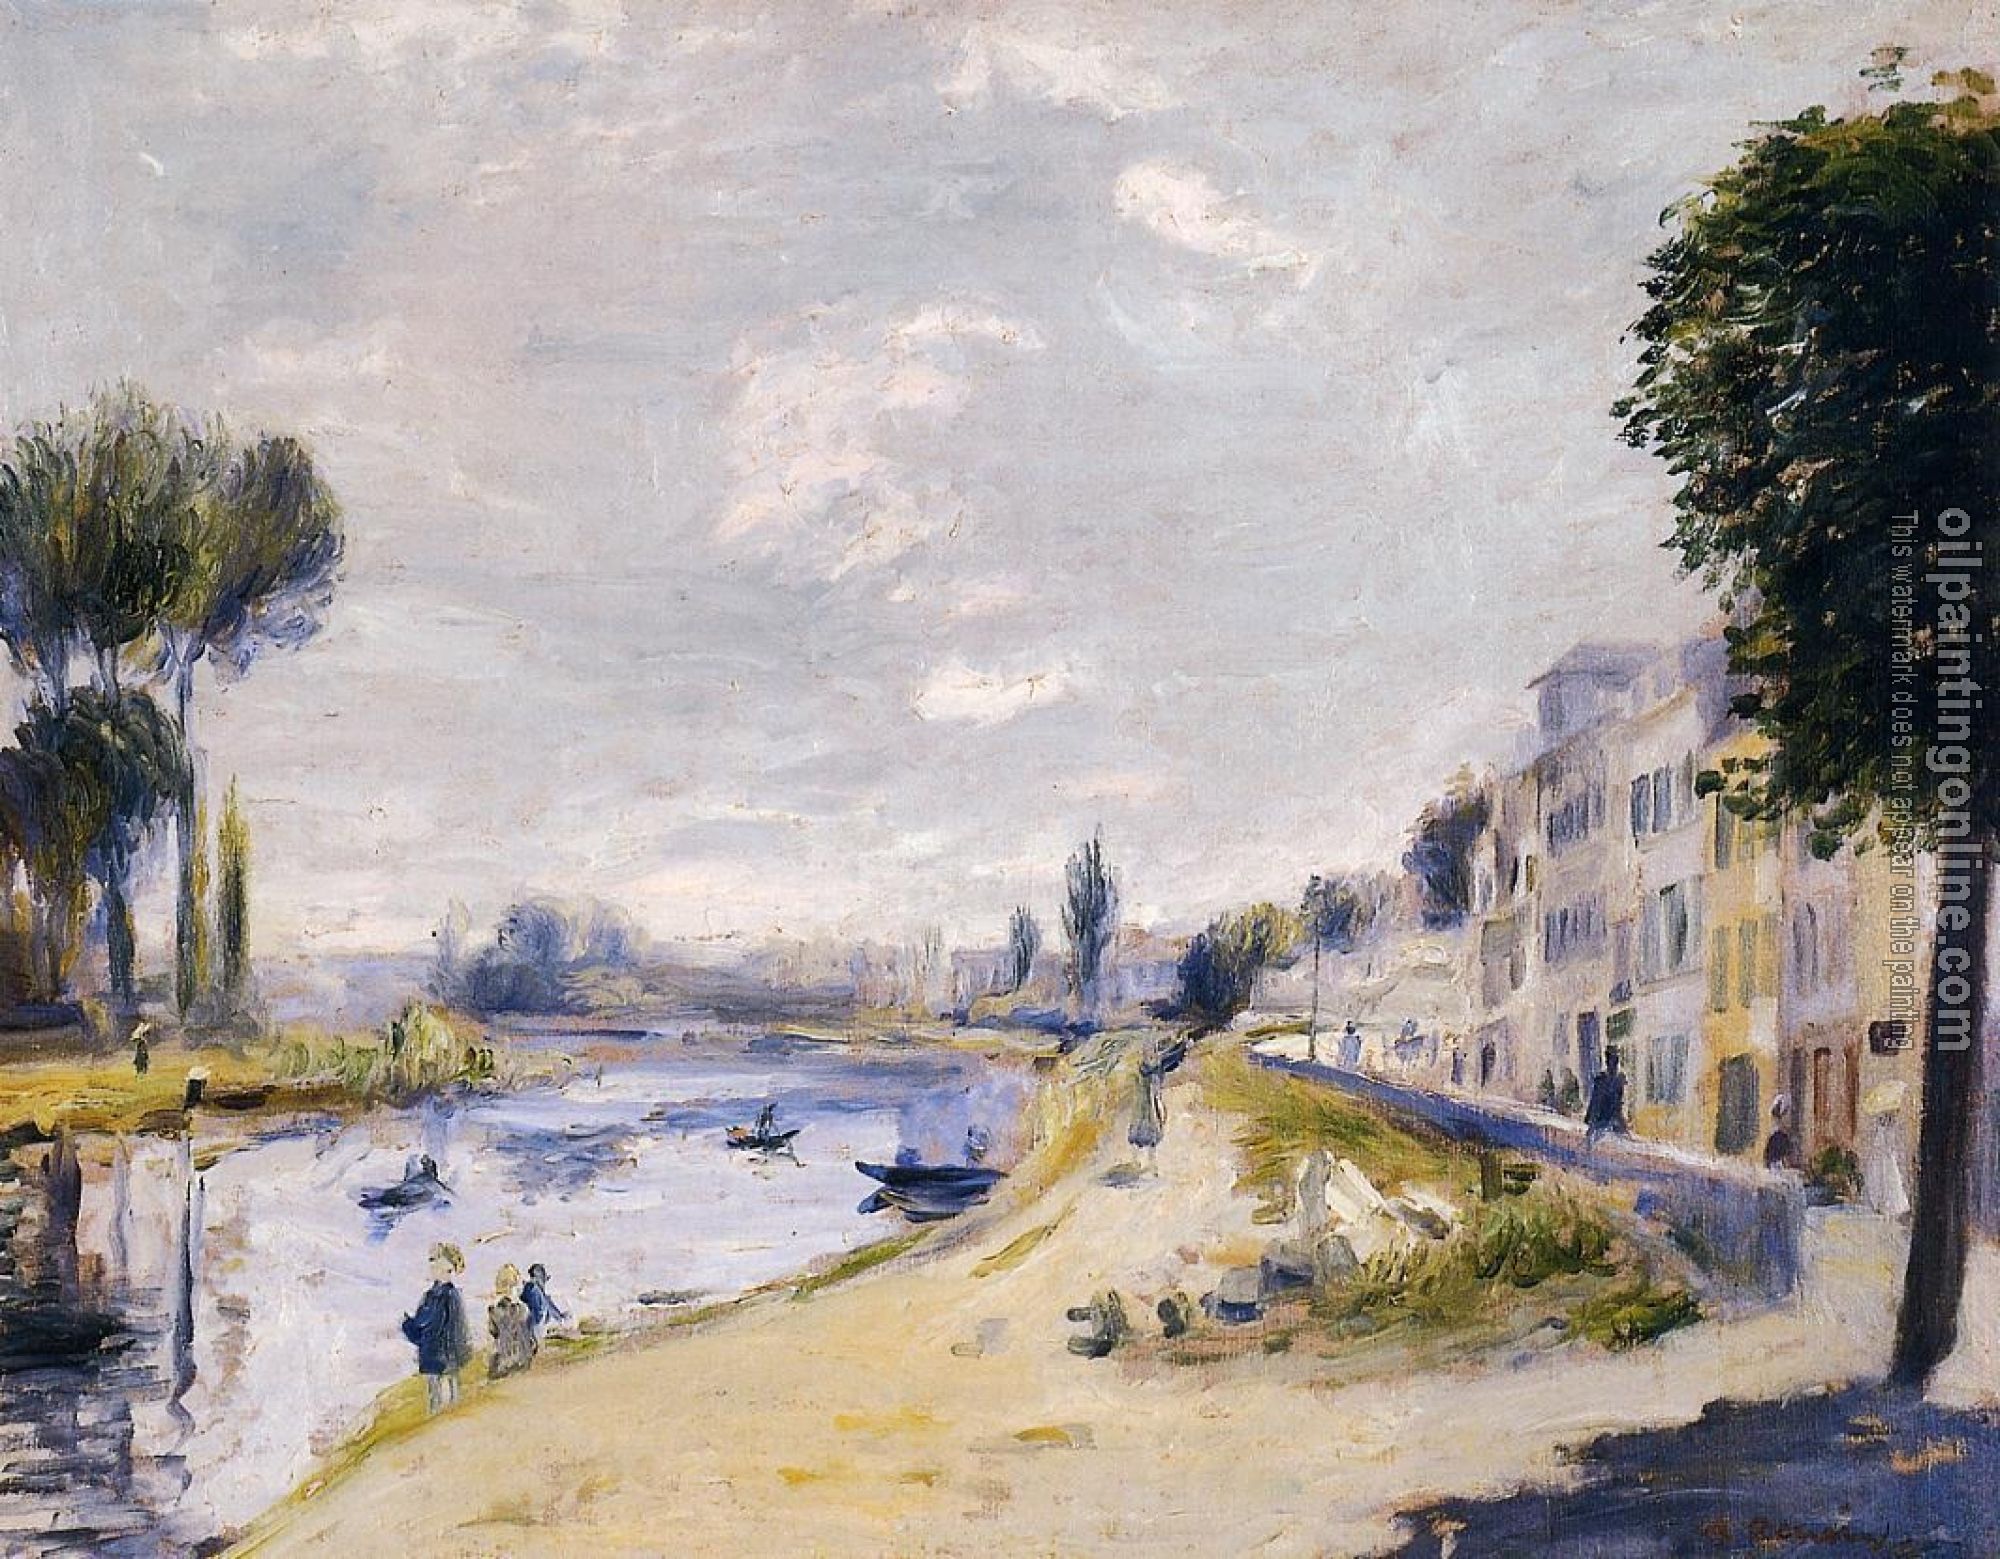 Renoir, Pierre Auguste - The Banks of the Seine, Bougival